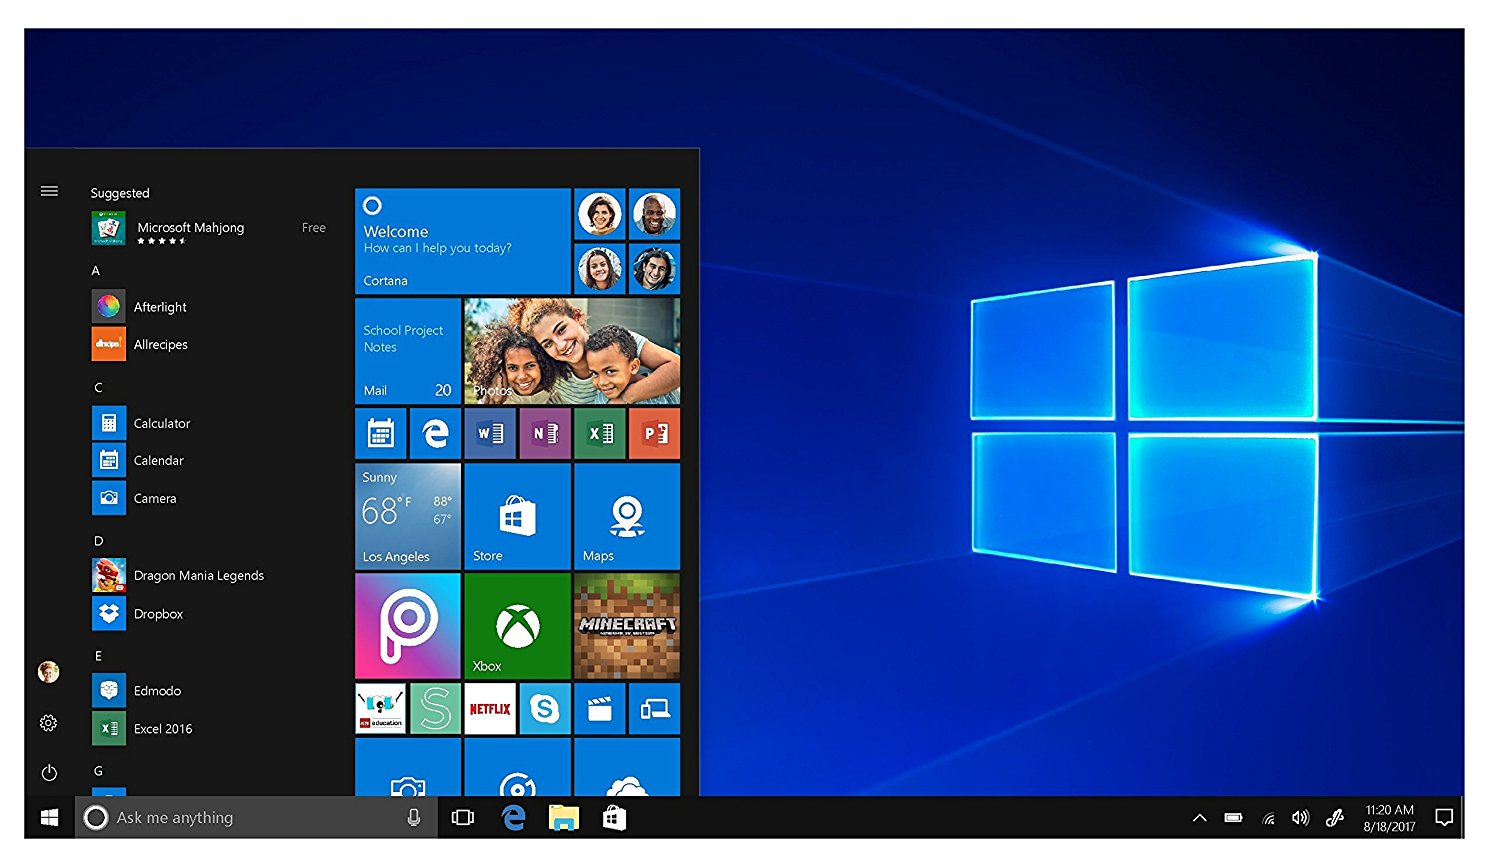 the windows 10 start screen is shown in this image